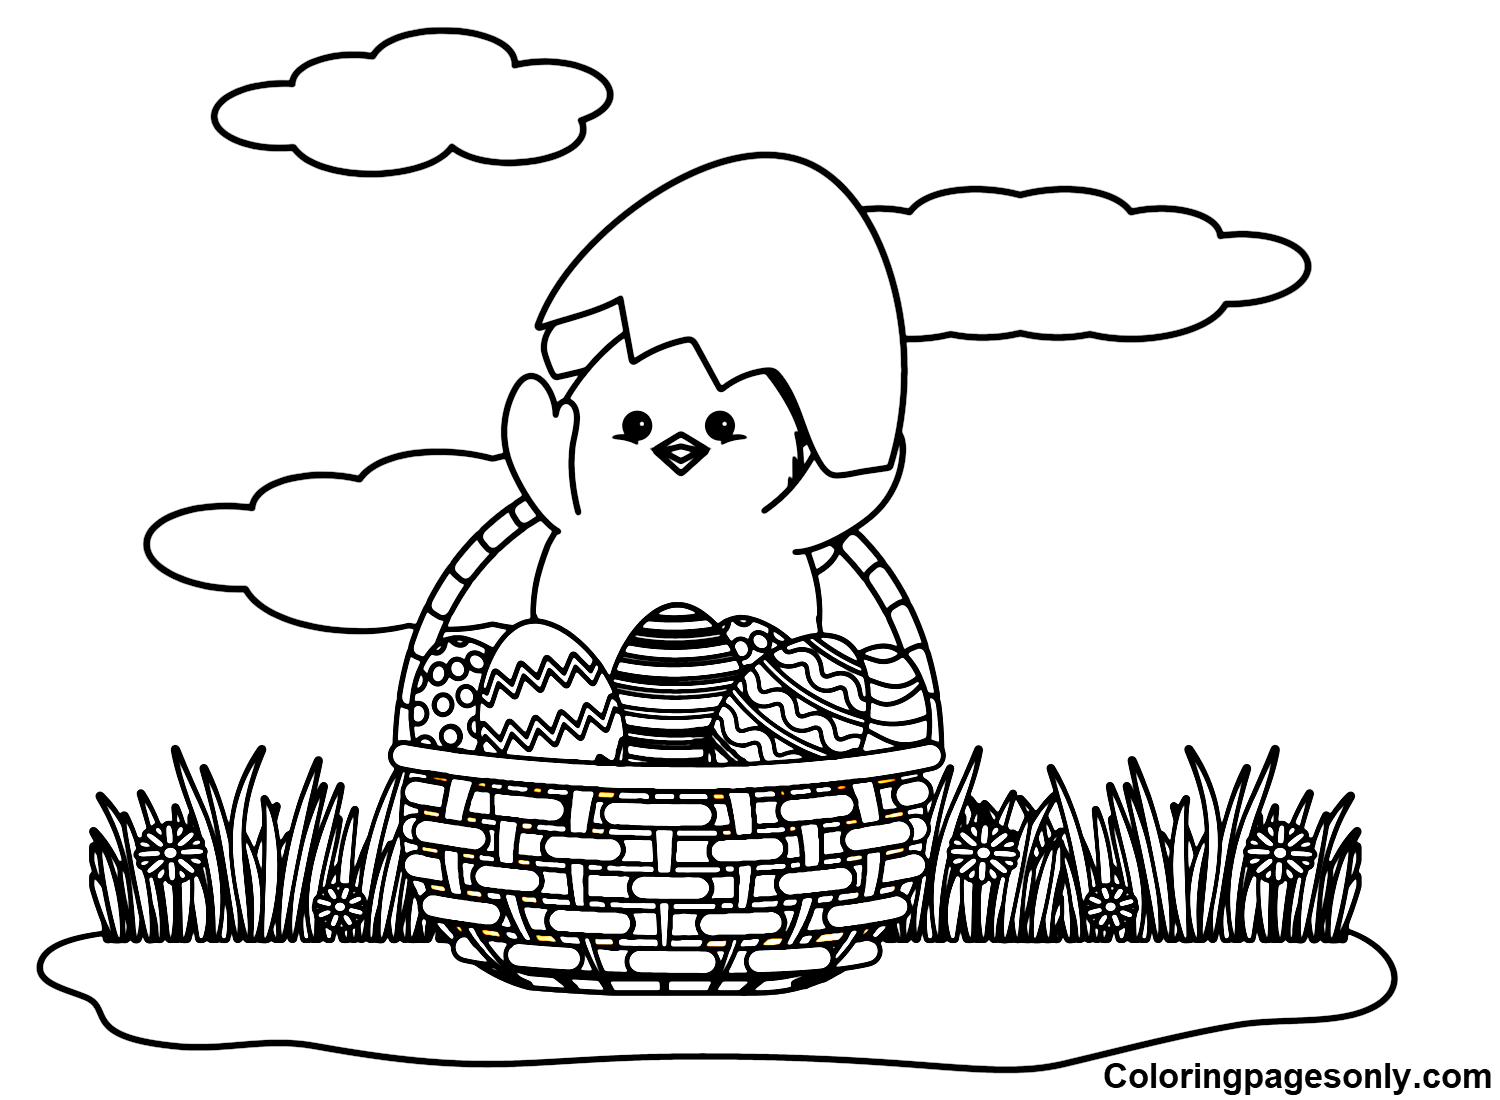 Adorable Chick Easter Coloring Pages